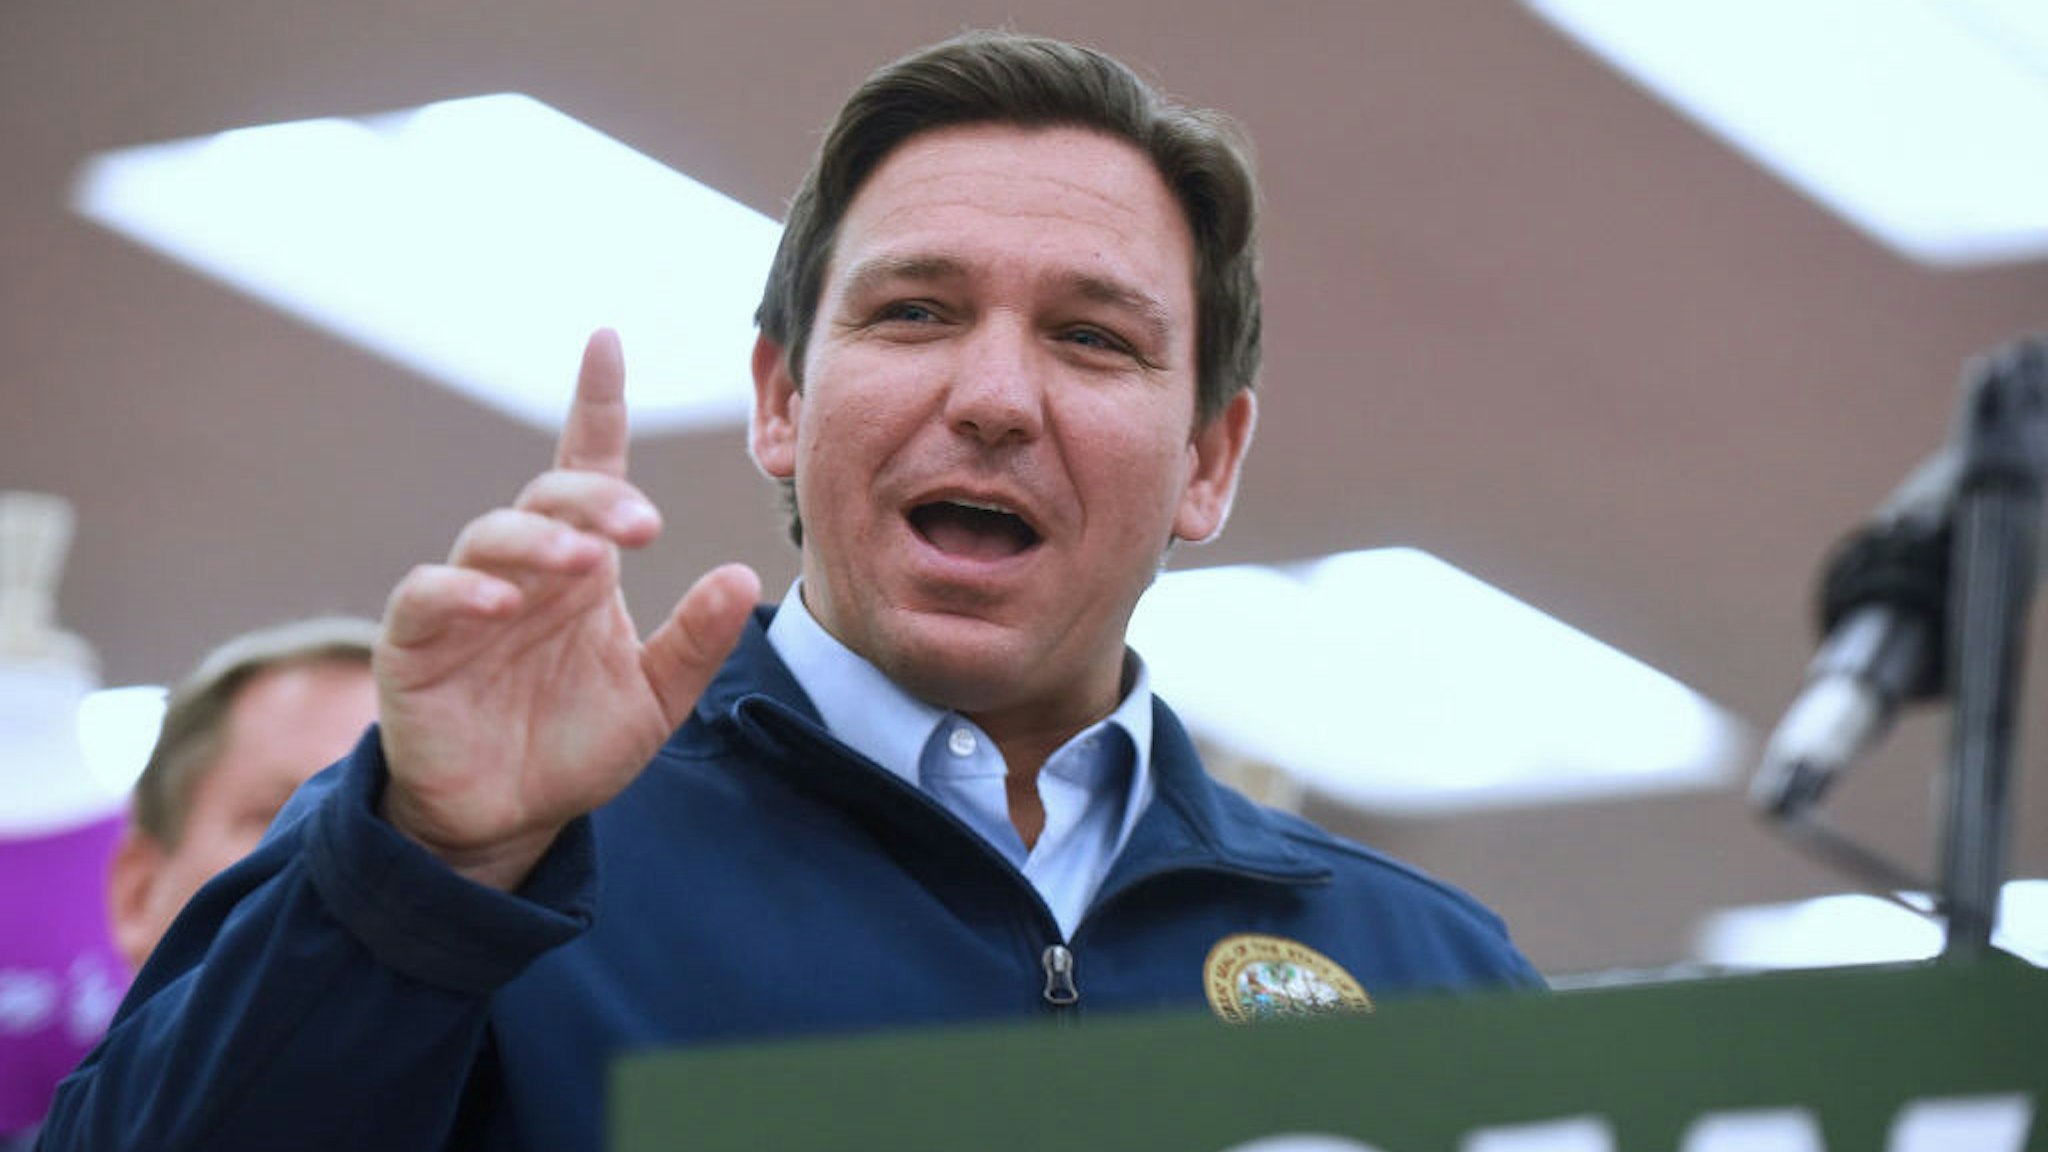 DAYTONA BEACH, FLORIDA, UNITED STATES - 2021/11/22: Florida Gov. Ron DeSantis speaks at a press conference at Buc-ee's travel center, where he announced his proposal of more than $1 billion in gas tax relief for Floridians in response to rising gas prices caused by inflation. DeSantis is proposing to the Florida legislature a five-month gas tax holiday. (Photo by Paul Hennessy/SOPA Images/LightRocket via Getty Images)